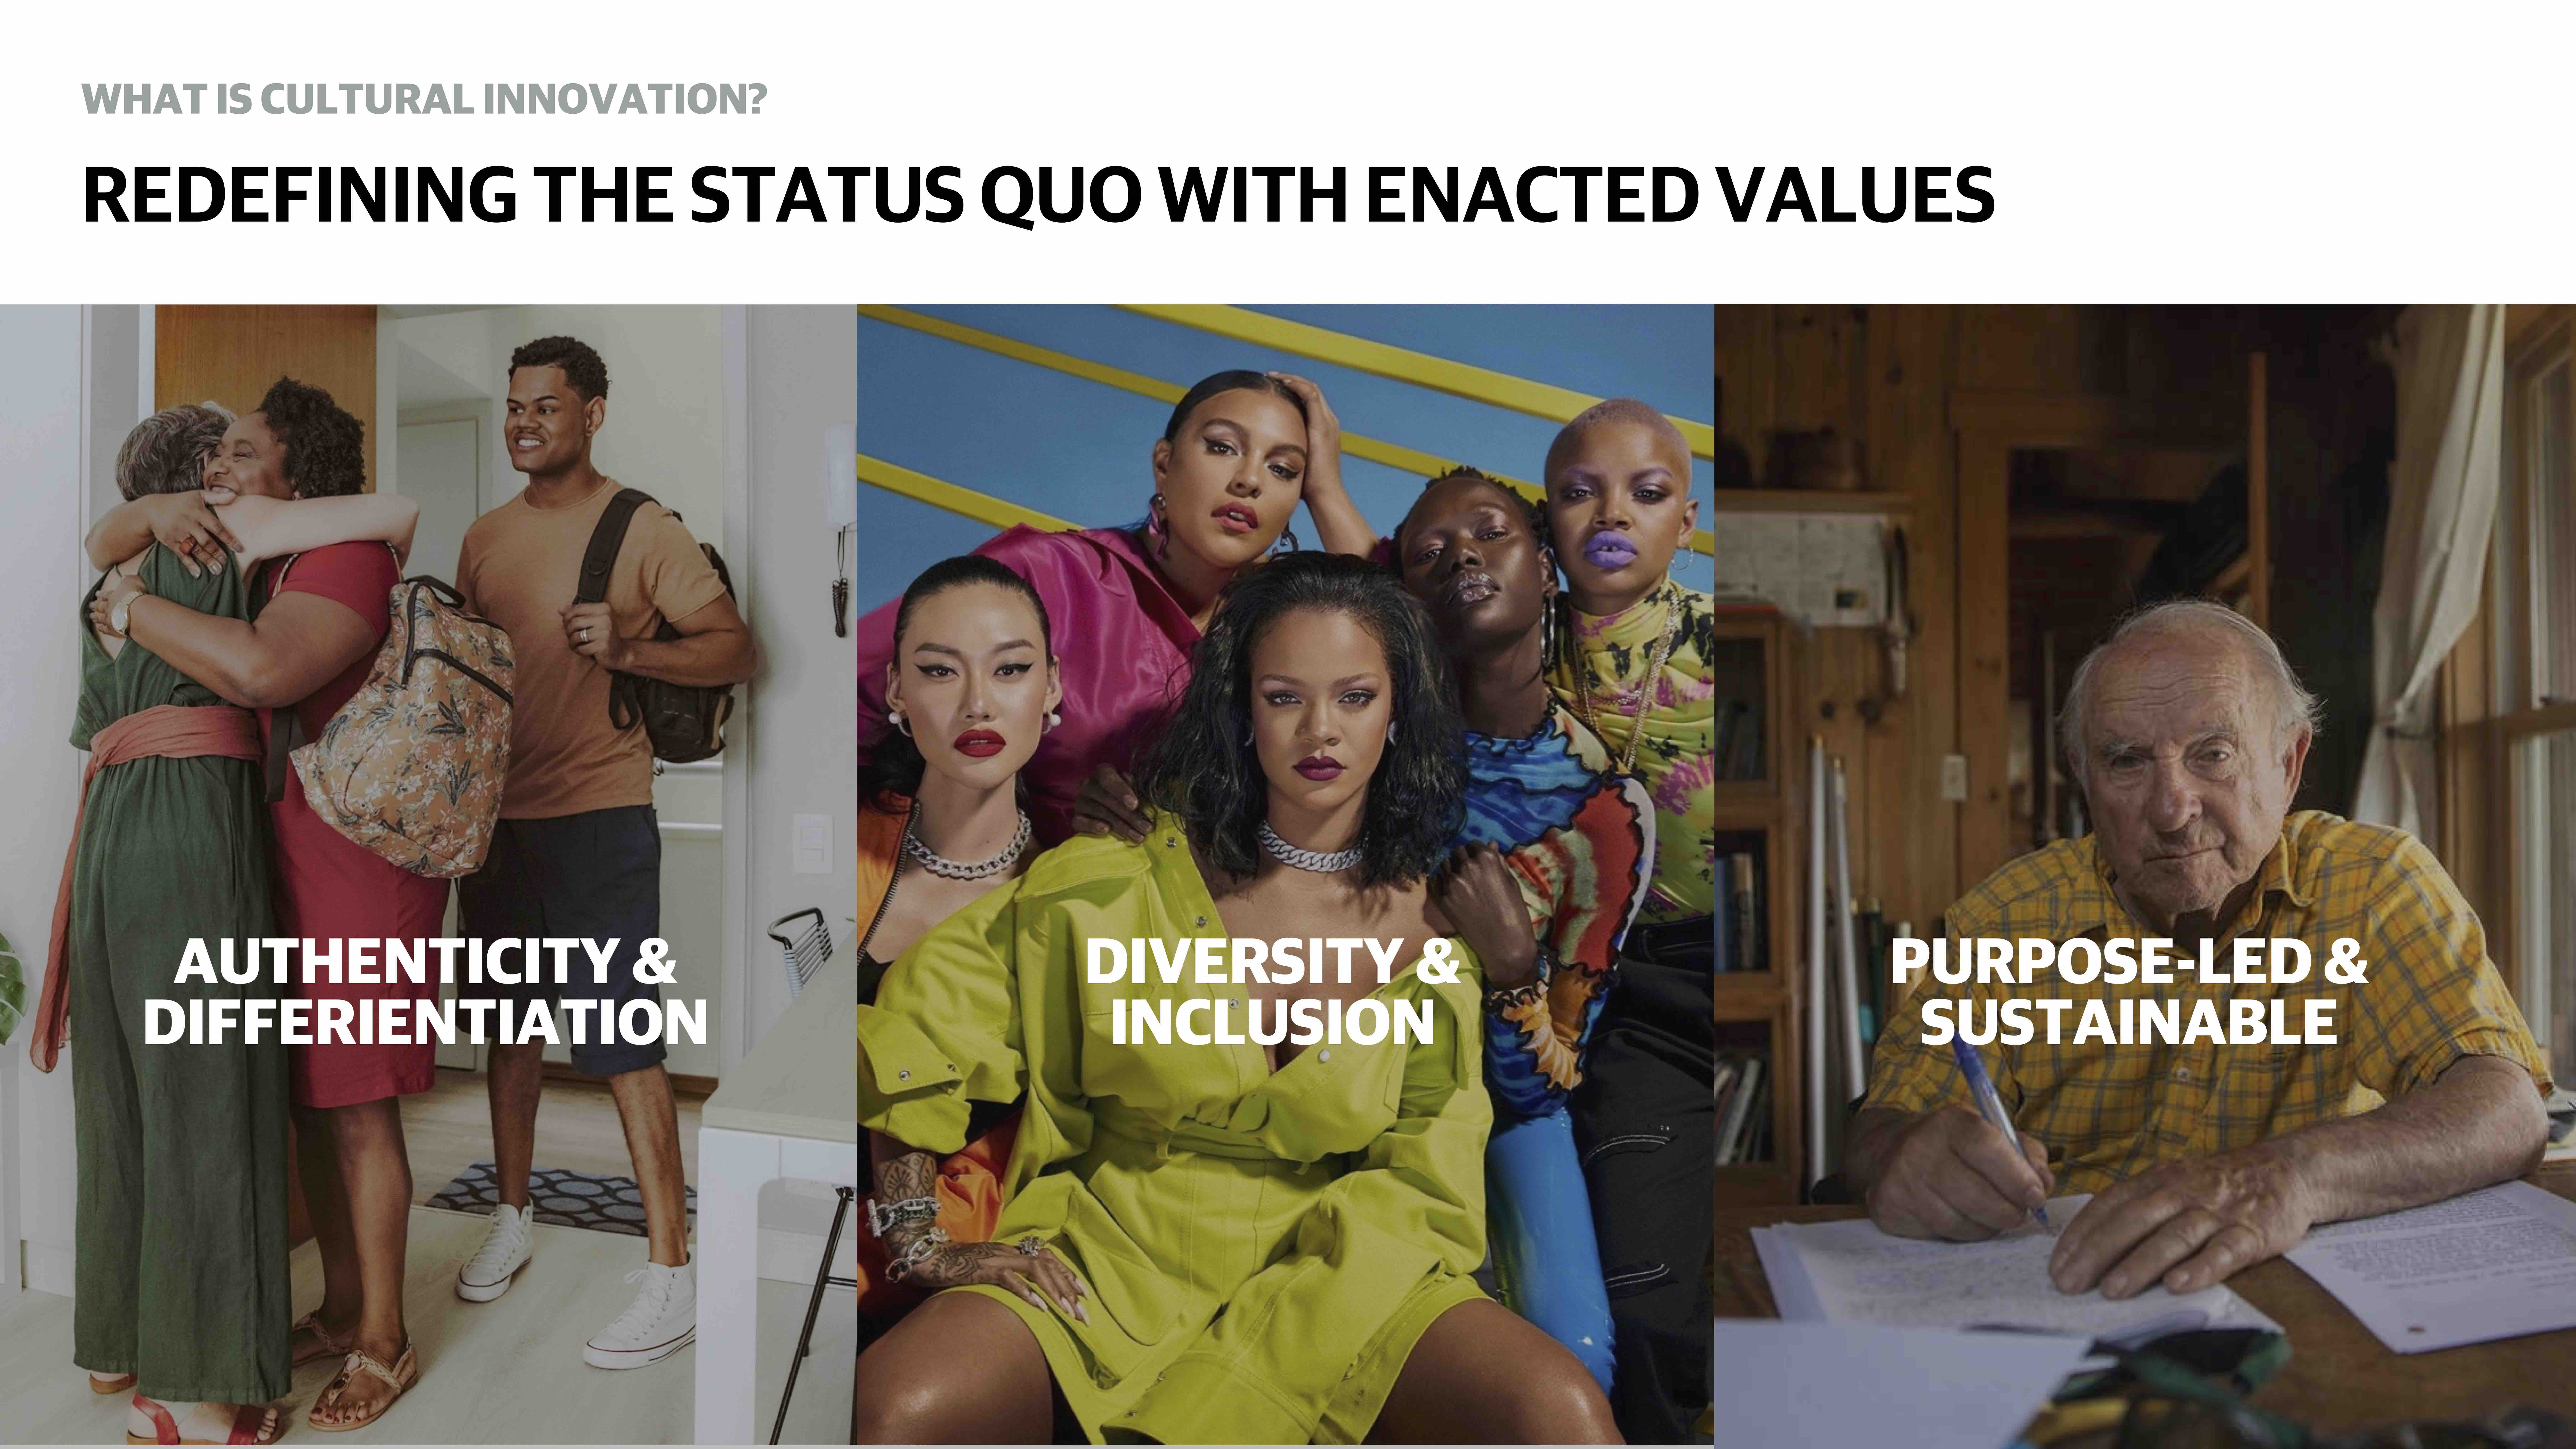 Redefining the status quo with enacted values